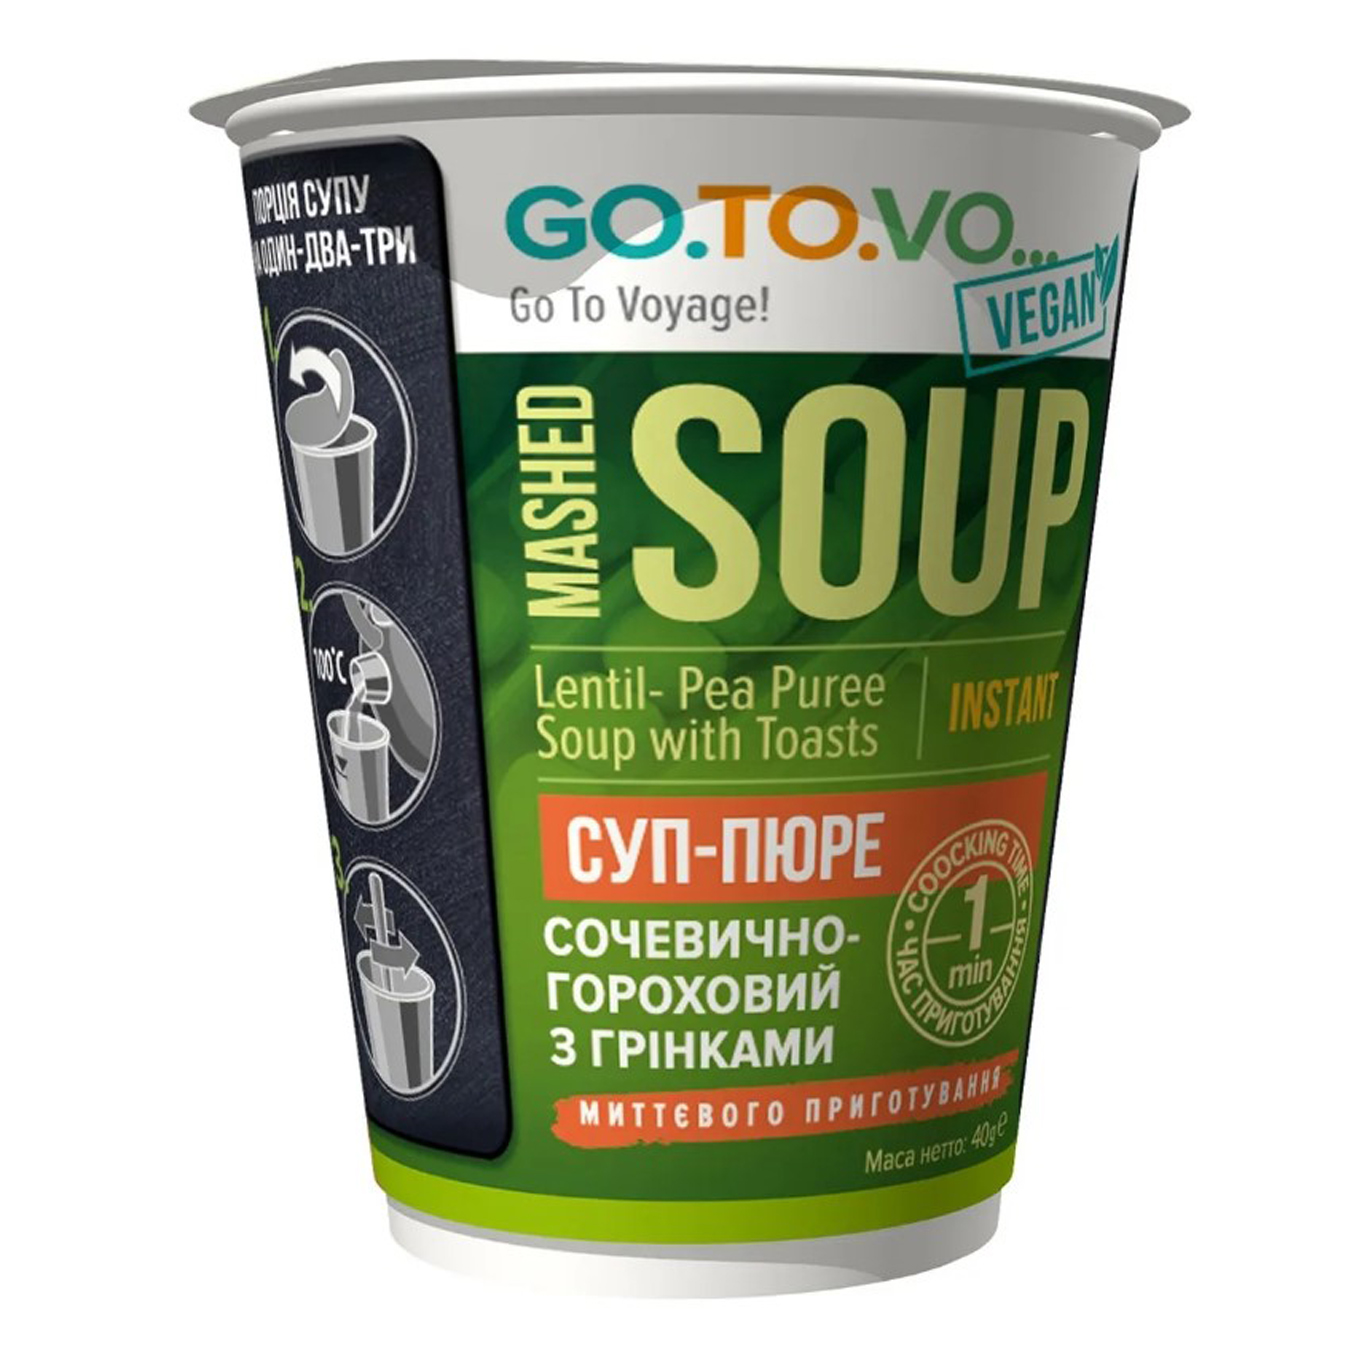 Go.To.Vo lentil-pea puree soup with instant croutons 40g